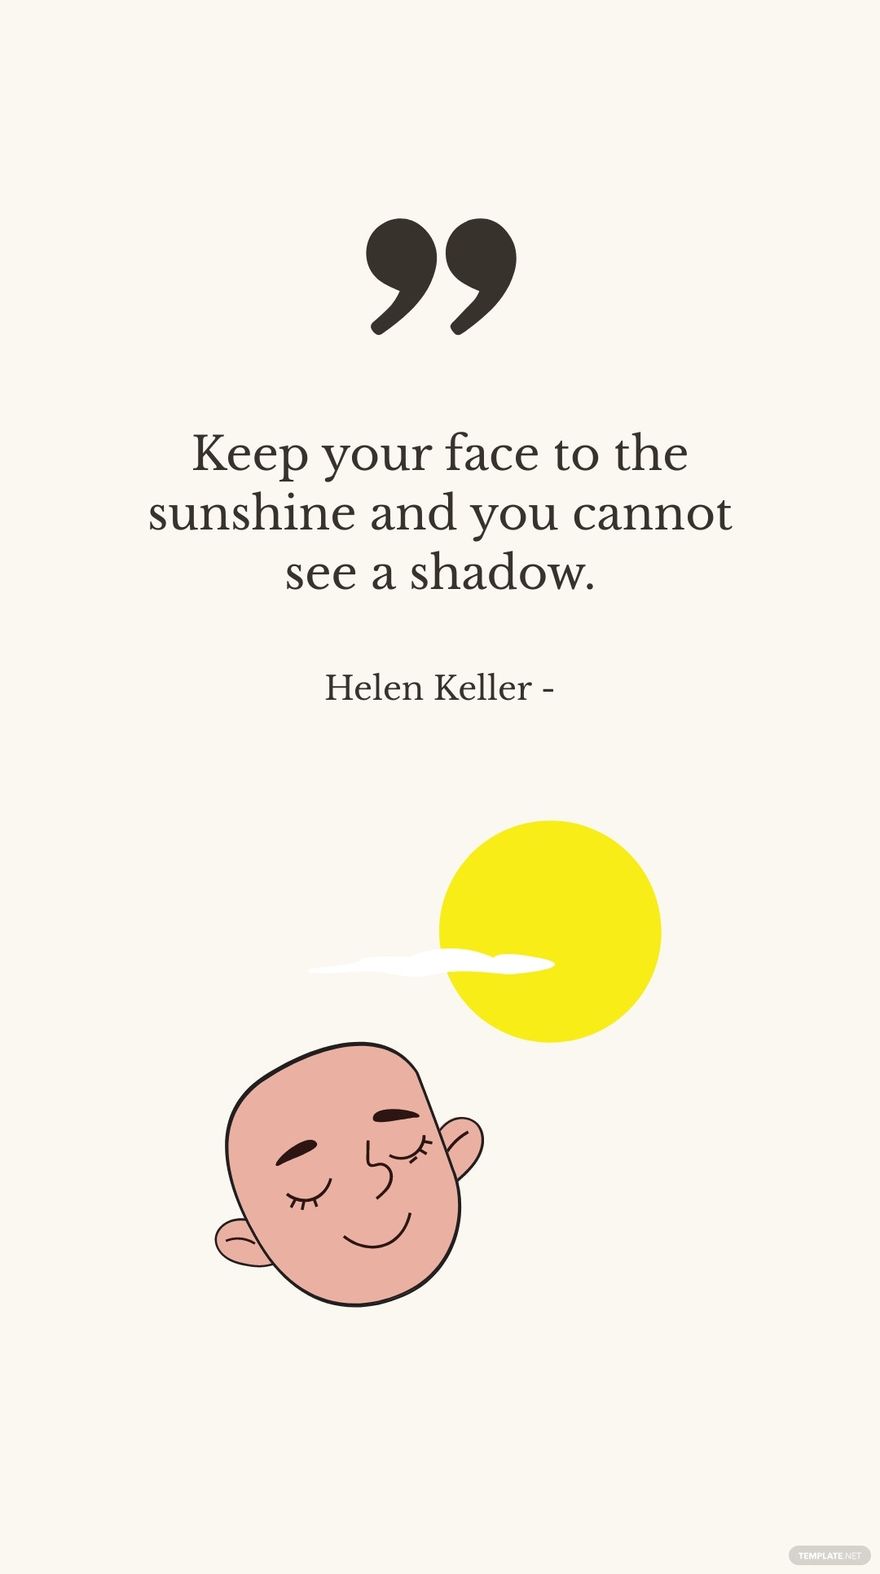 Helen Keller - Keep your face to the sunshine and you cannot see a shadow.